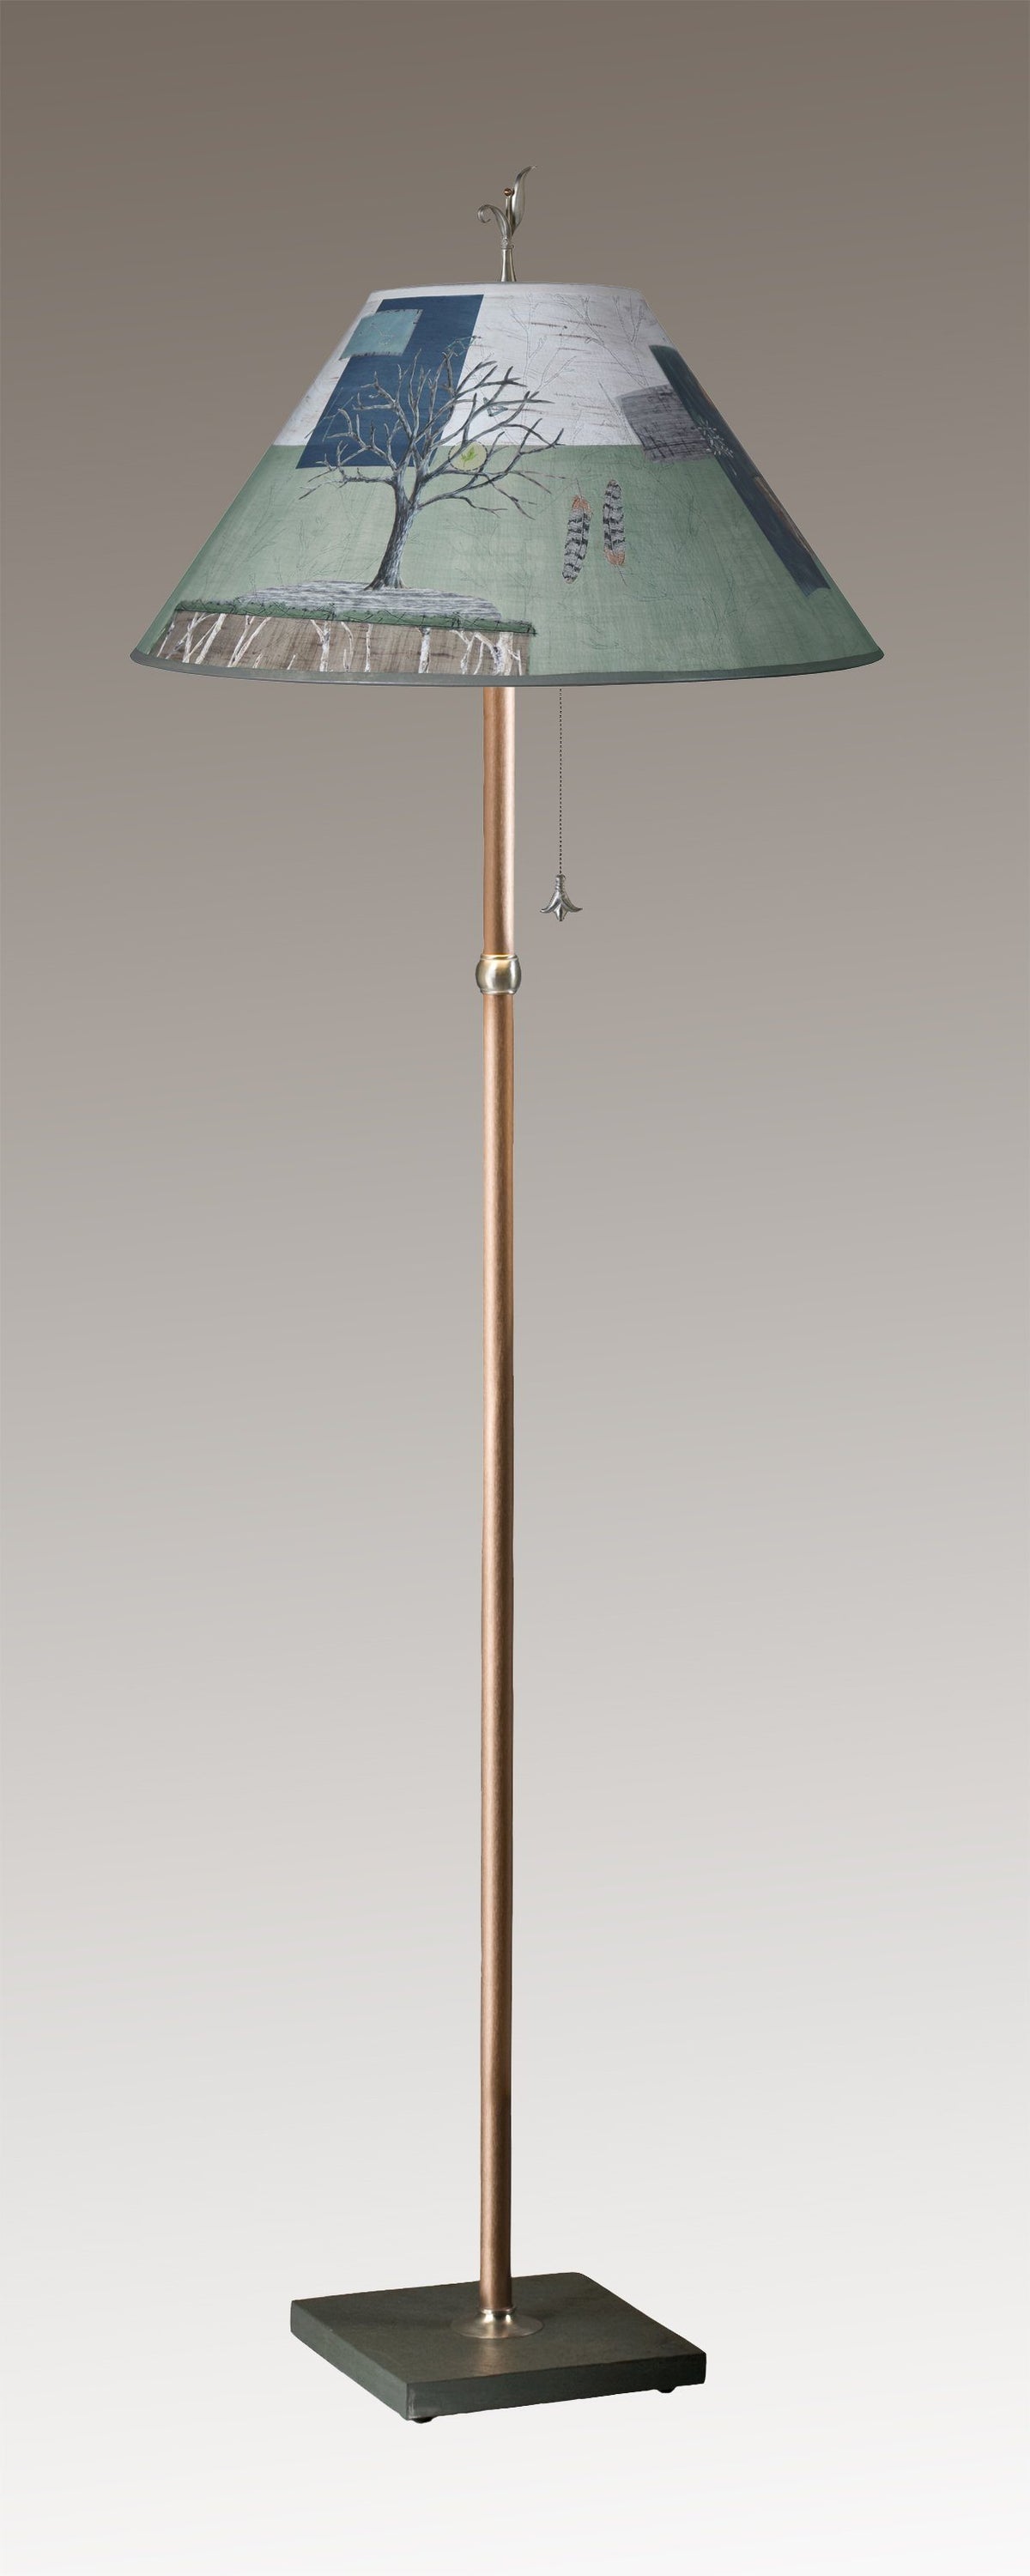 Janna Ugone &amp; Co Floor Lamps Copper Floor Lamp with Large Conical Shade in Wander in Field